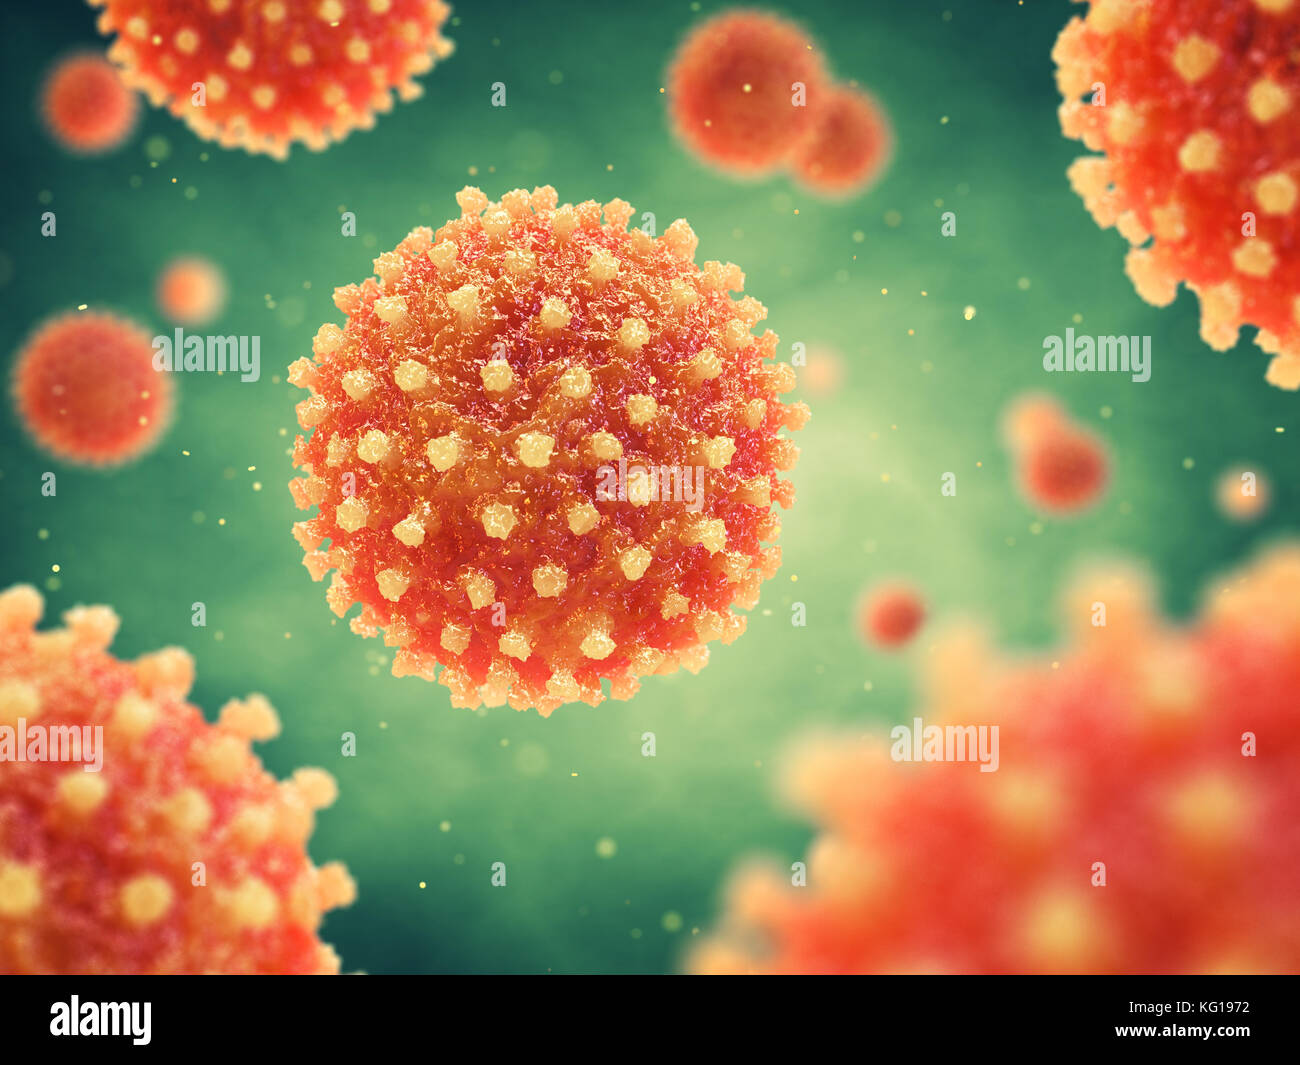 Chronic liver disease can be caused by a viral hepatitis infection , Hepatitis virus Stock Photo